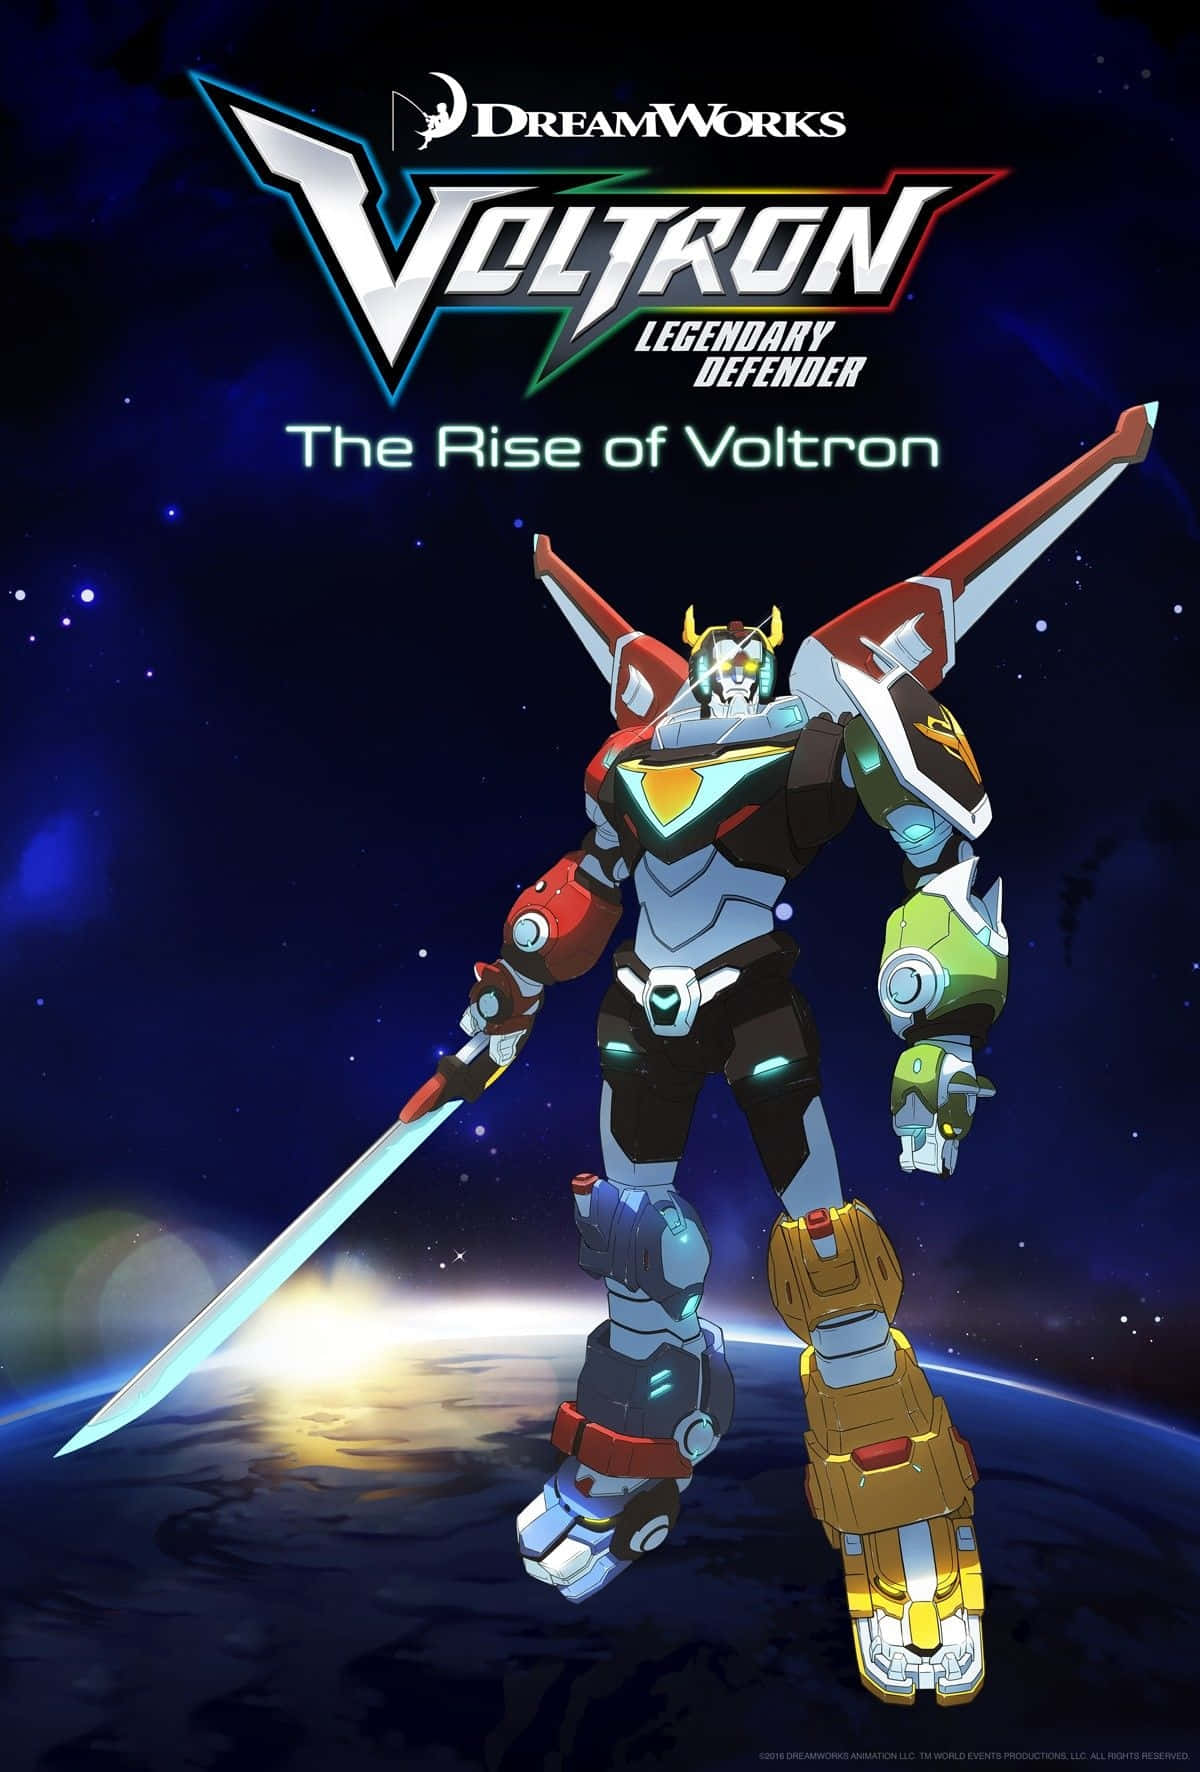 The heroic Voltron defends the universe Wallpaper